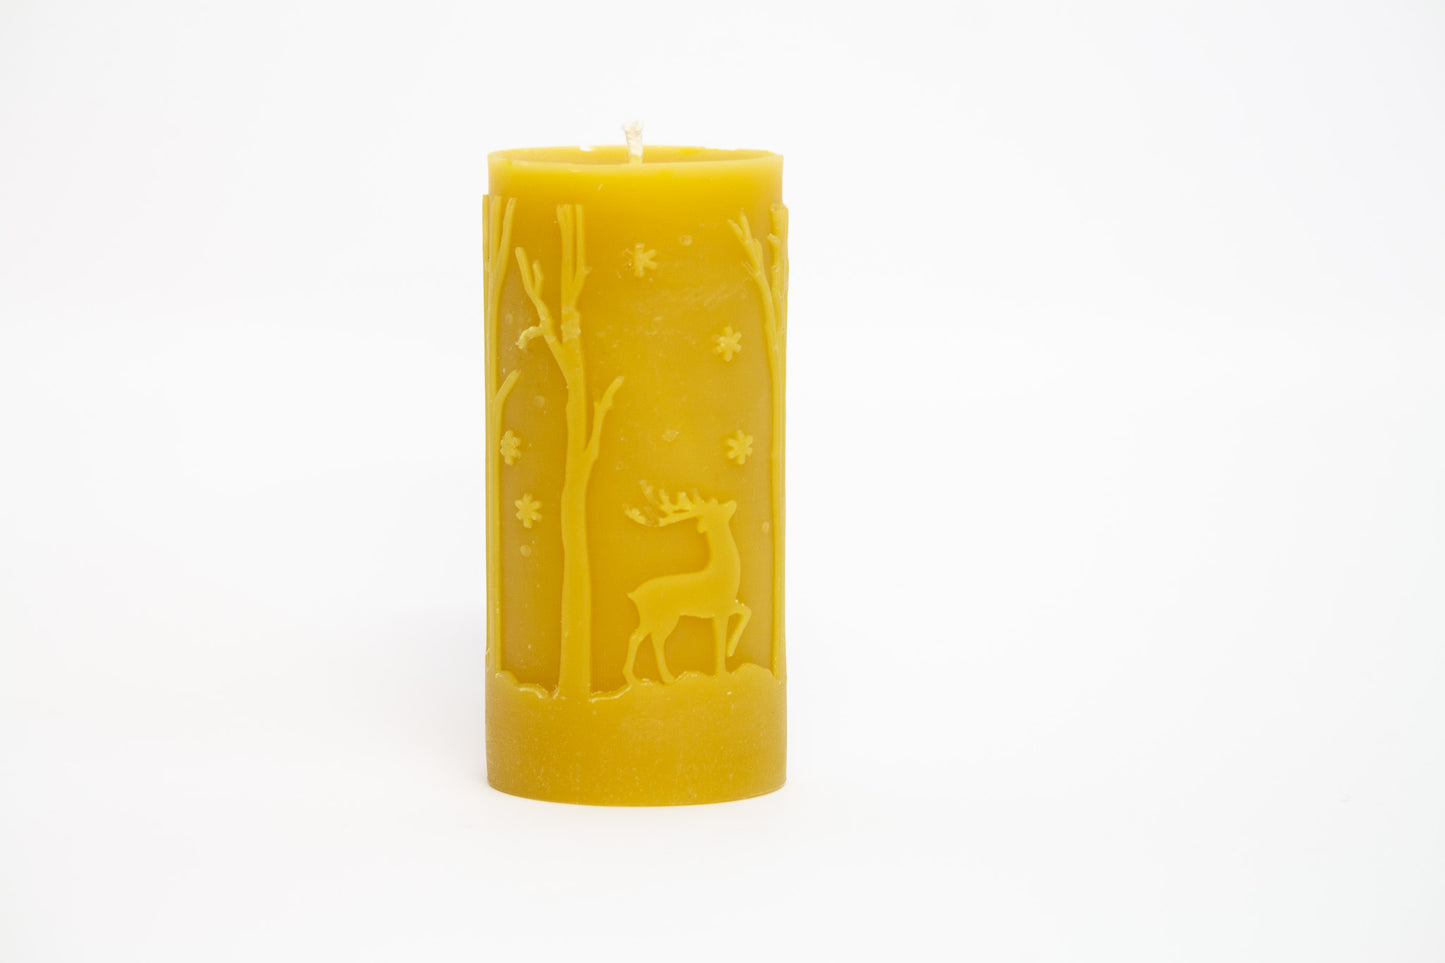 Pure Beeswax Caribou Candle by B Factory